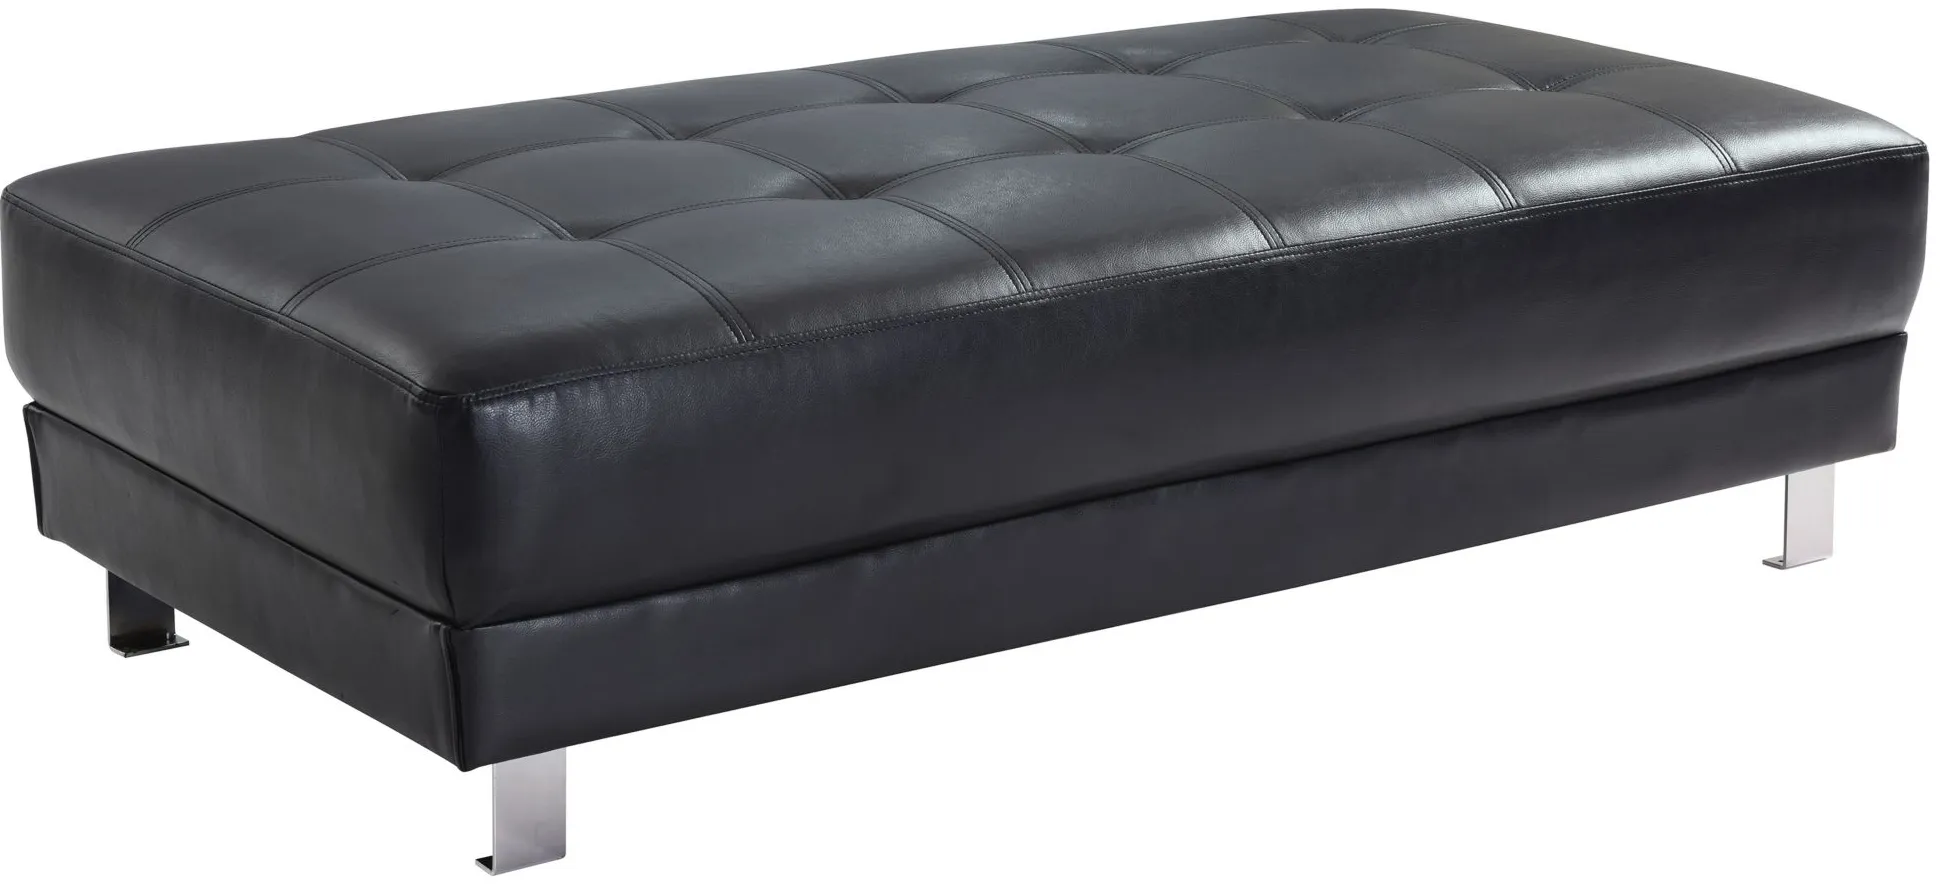 Riveredge Ottoman in Black by Glory Furniture